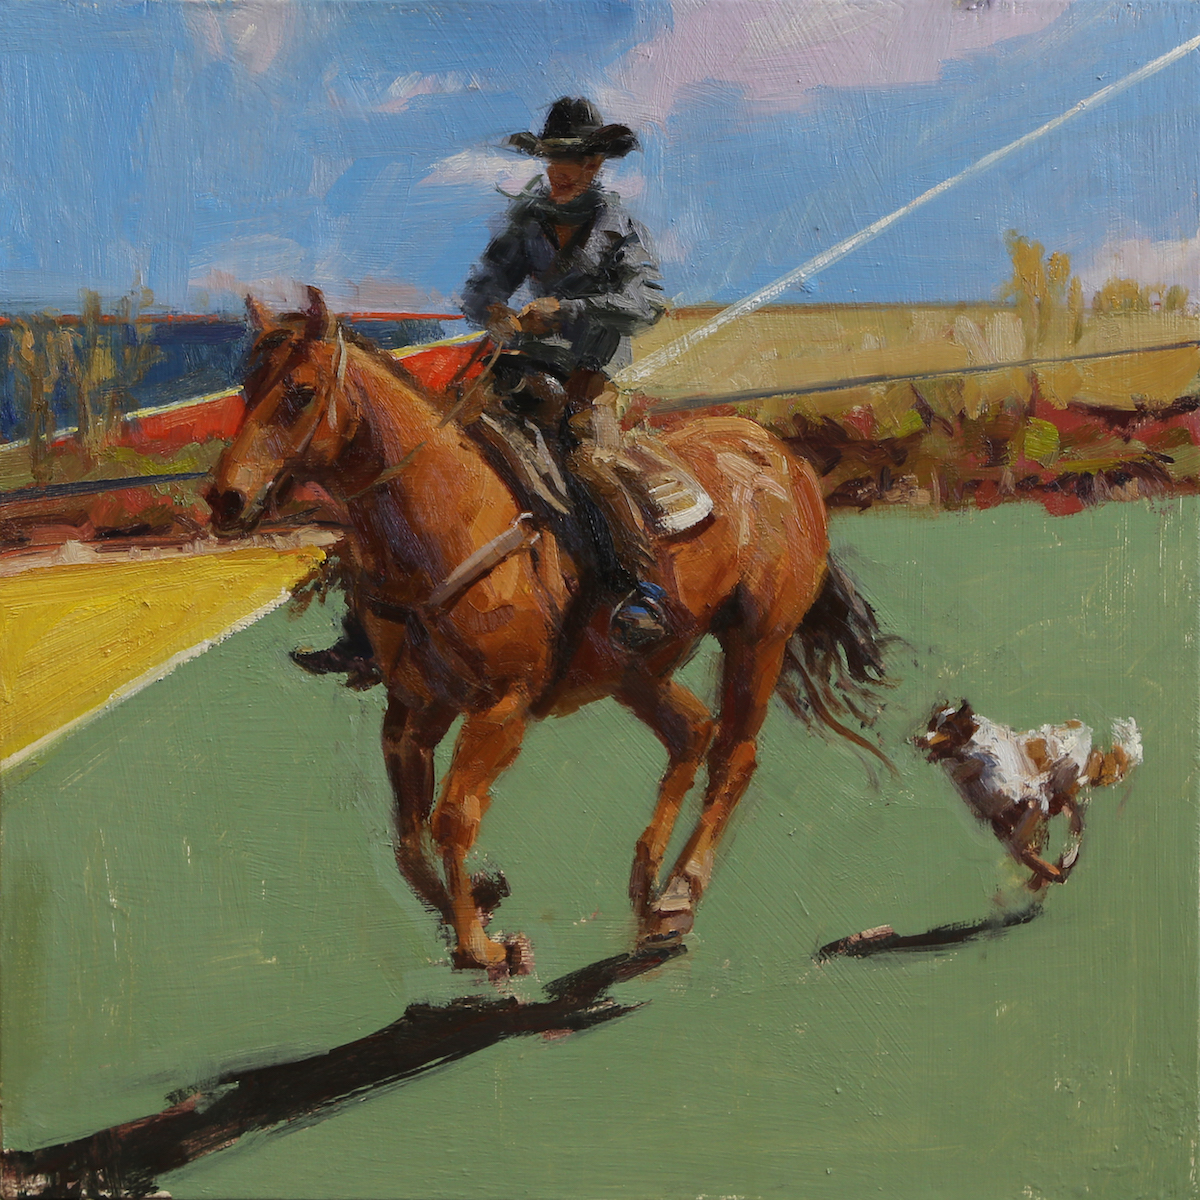 Raj Chaudhuri, "The Chase," Oil on linen, 12 x 12 in.